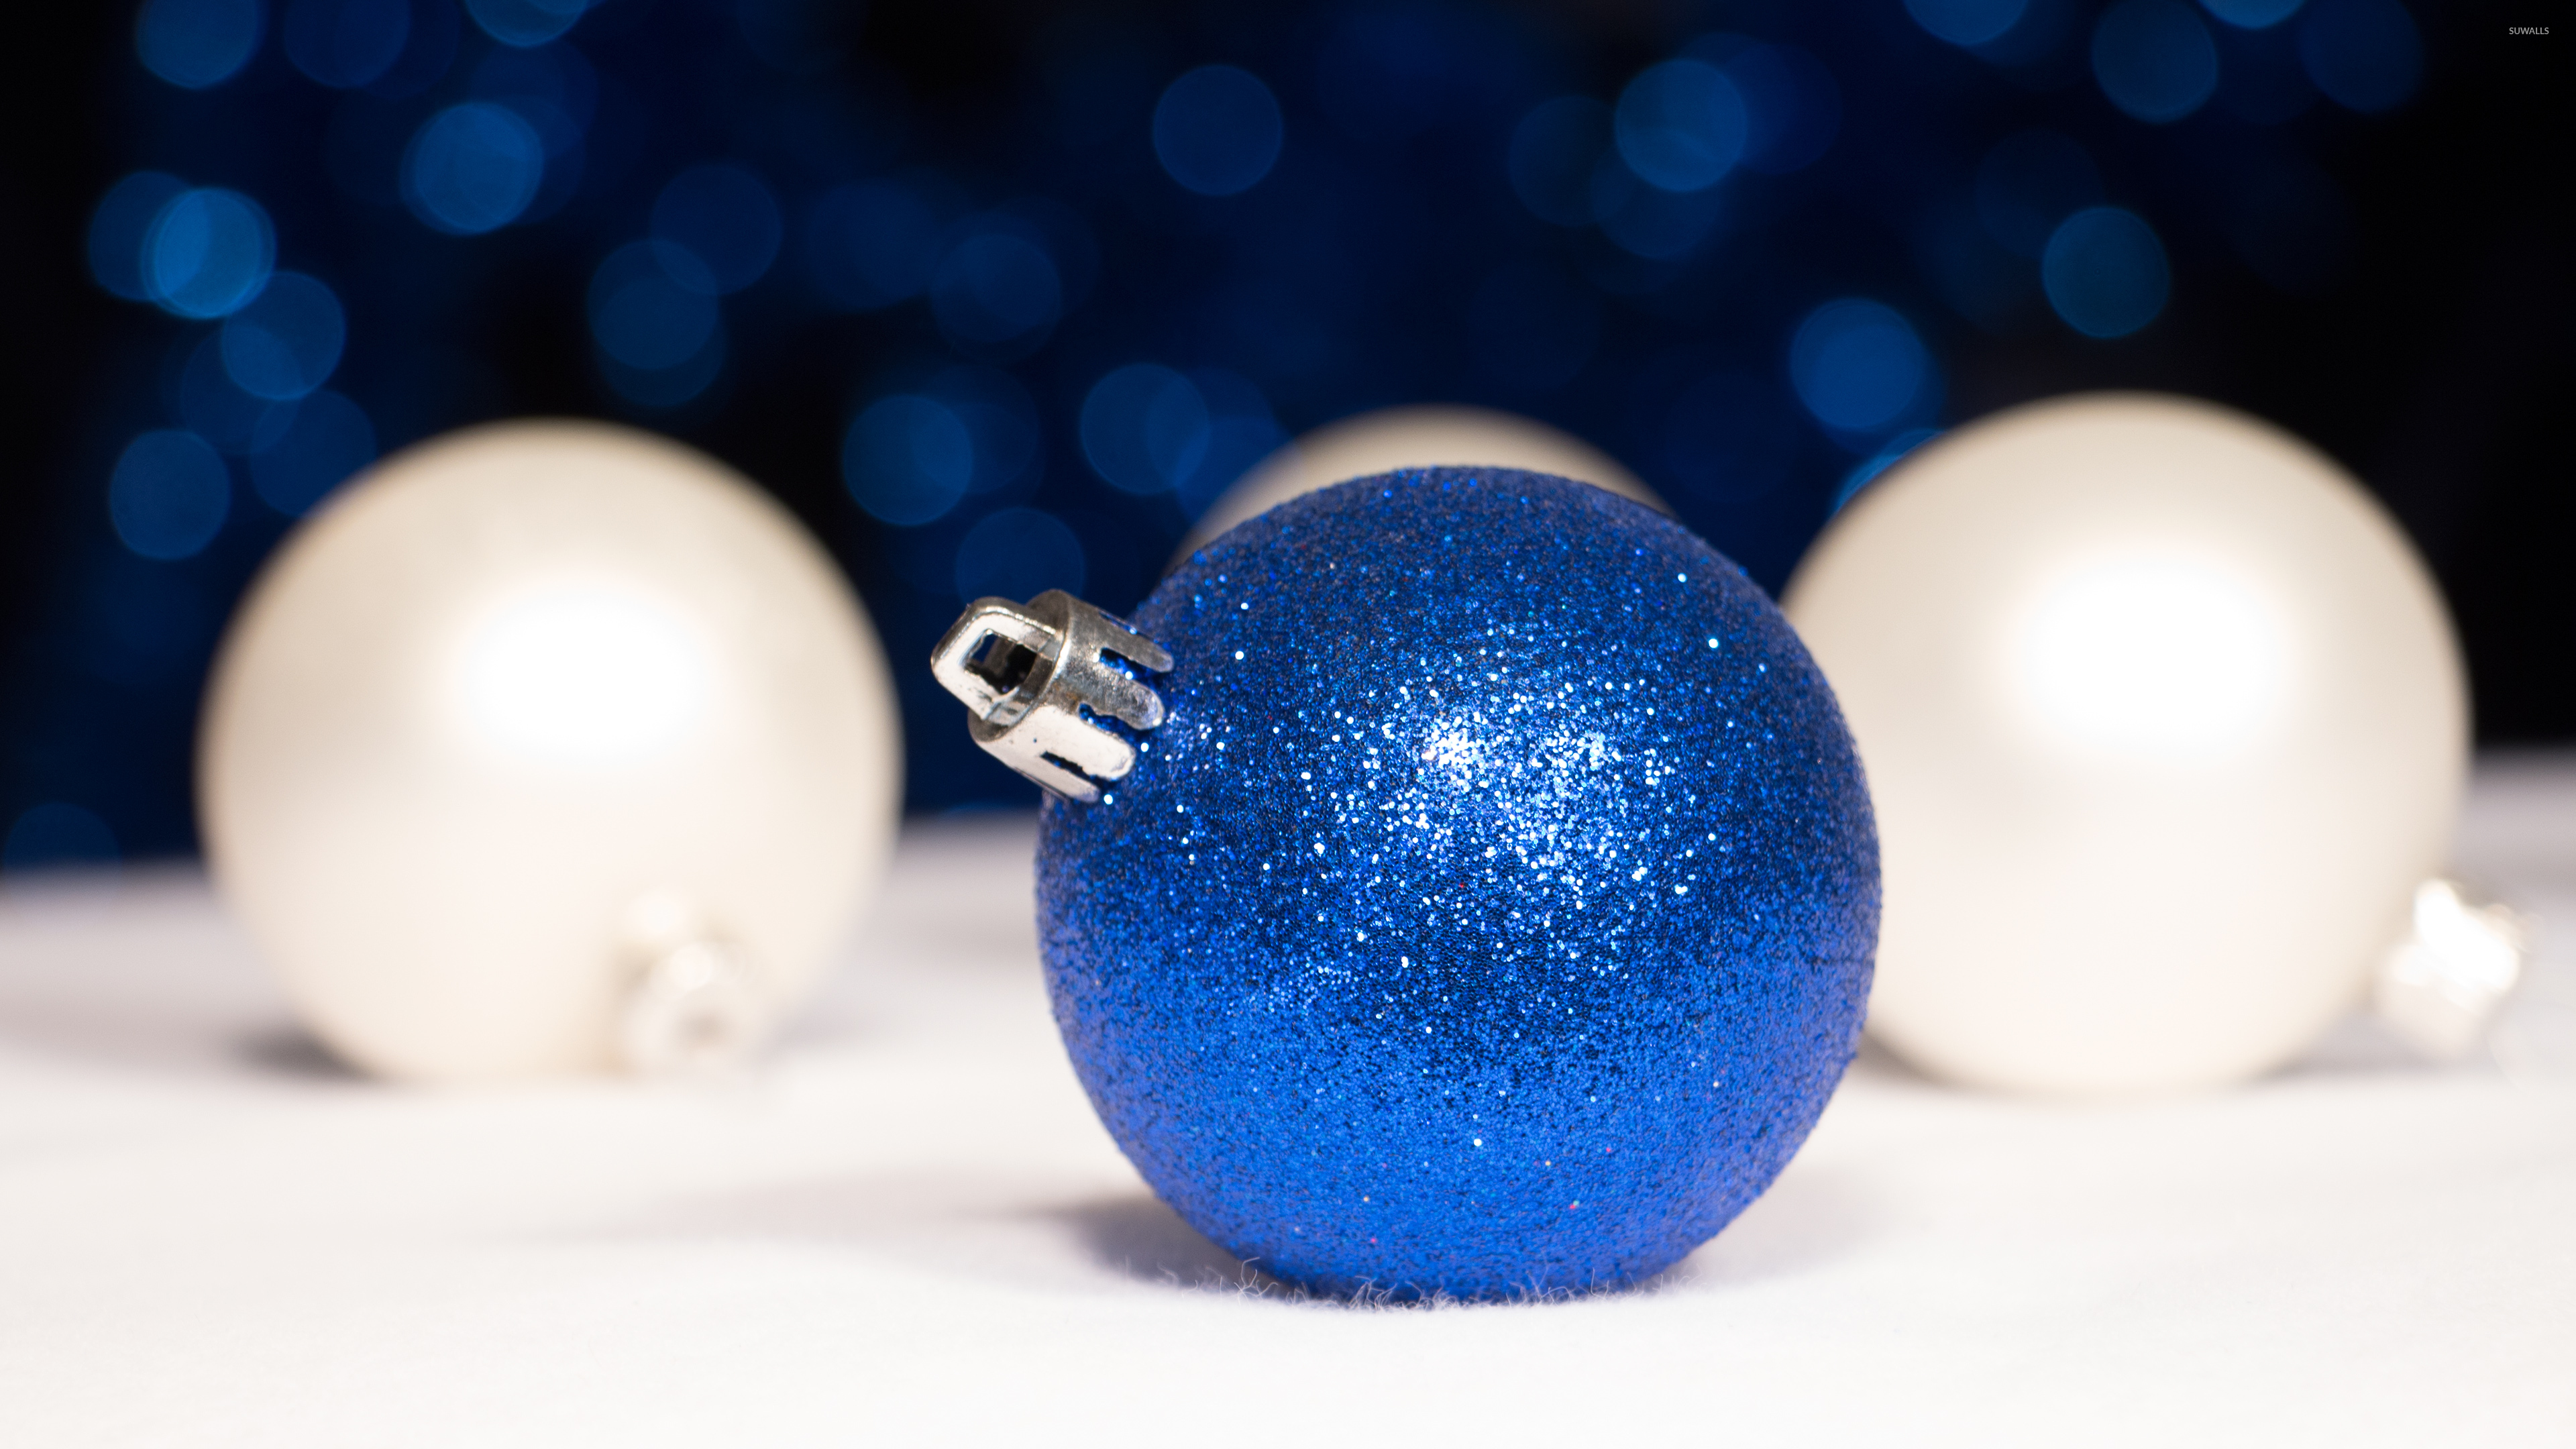 Blue Christmas bauble wallpaper - Holiday wallpapers - #51149